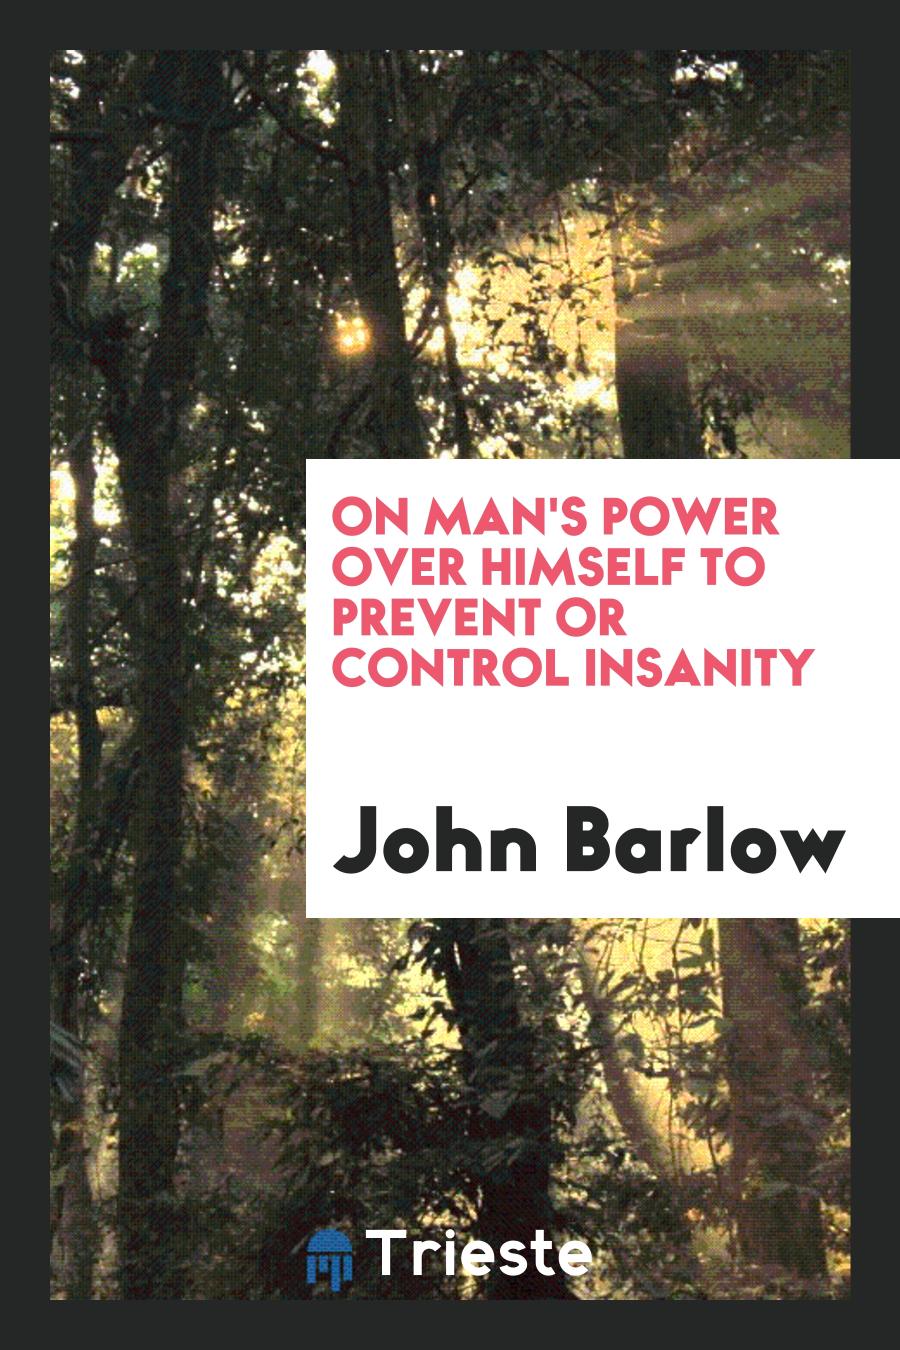 On man's power over himself to prevent or control insanity